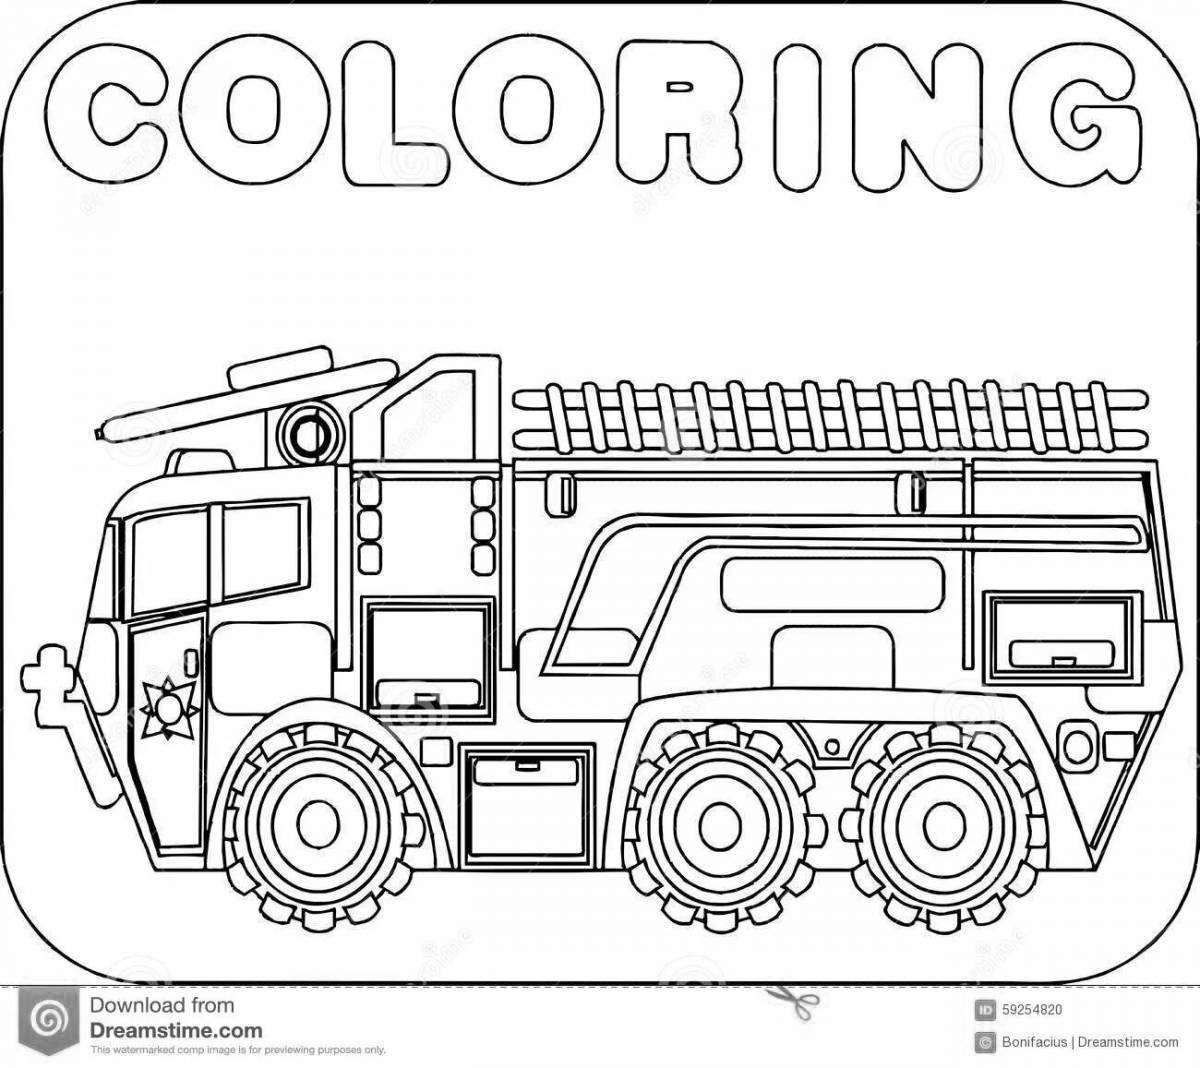 Beautiful fire truck coloring page for kids